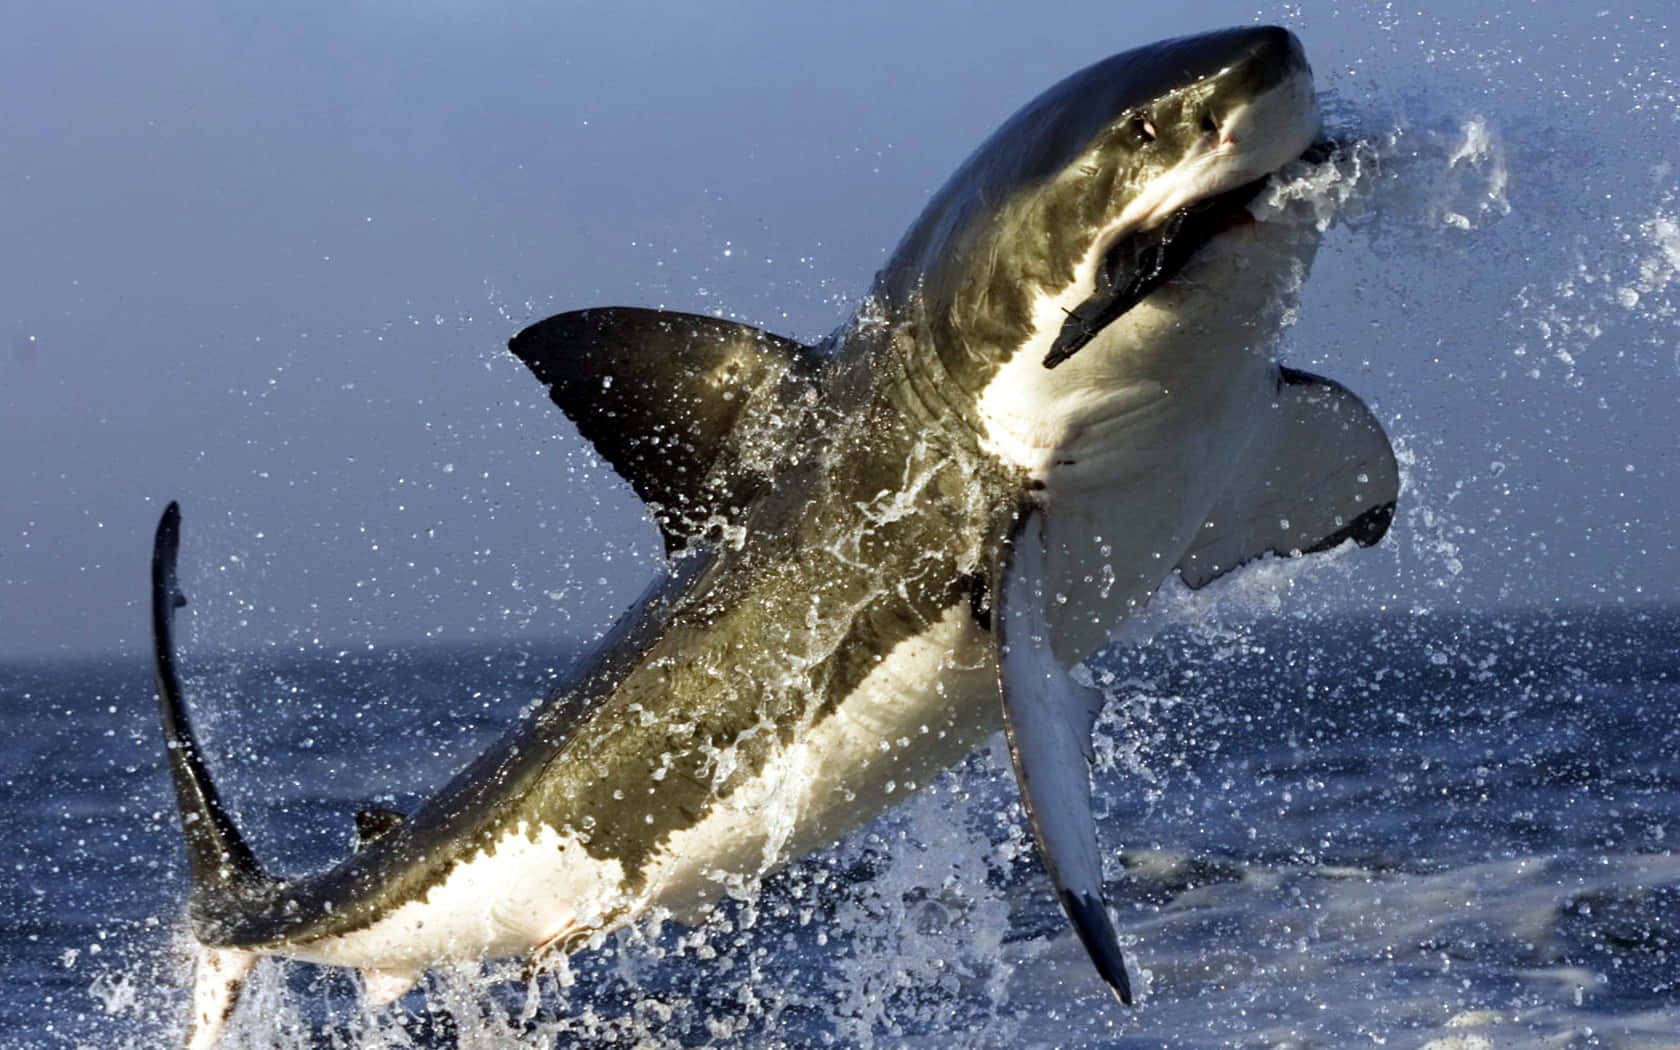 A great white shark exhibiting its strength and muscularity in the deep blue sea